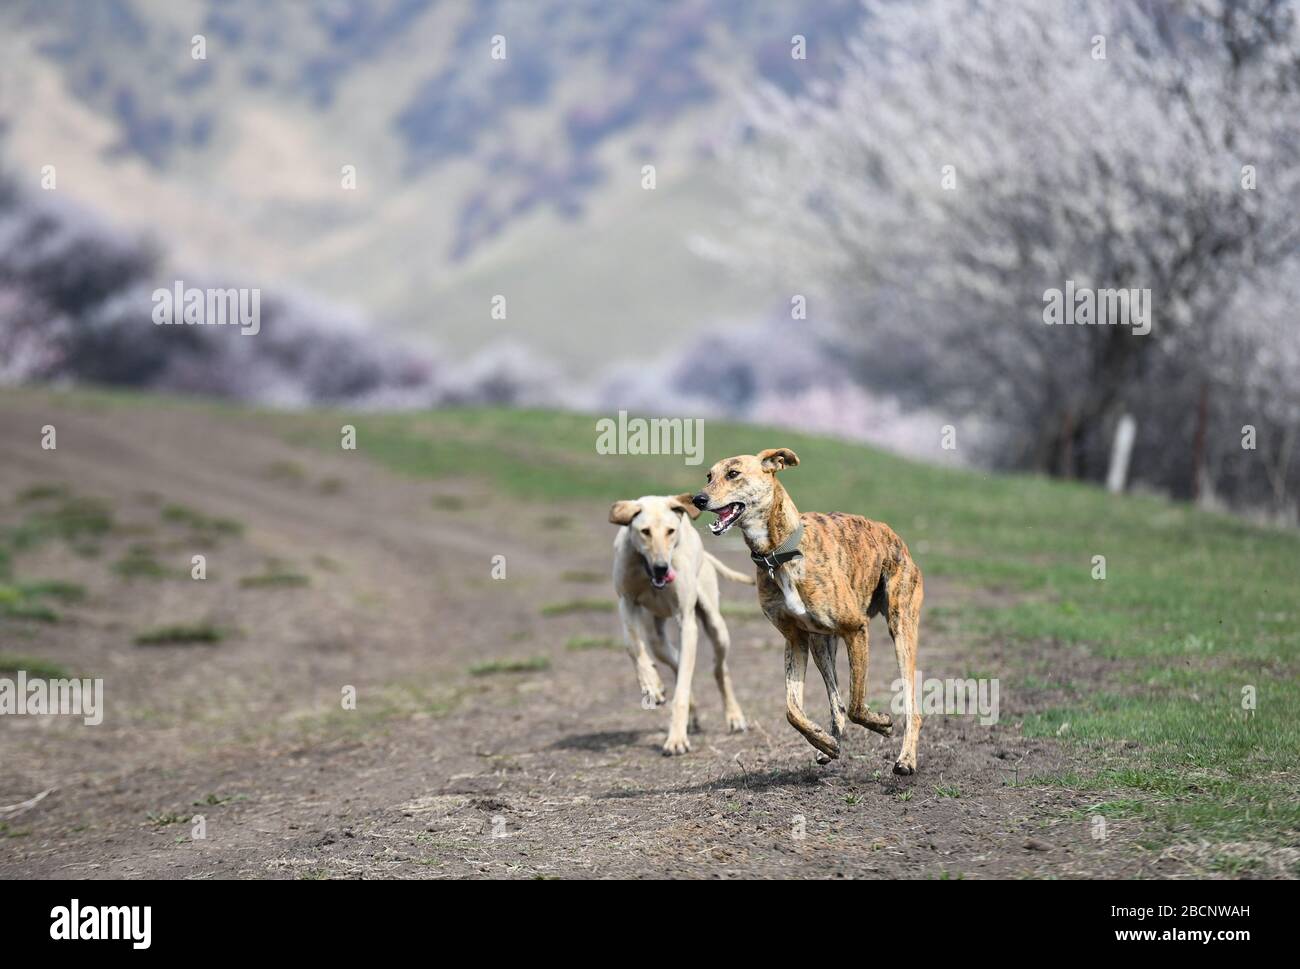 Ili, China's Xinjiang Uygur Autonomous Region. 4th Apr, 2020. Dogs run on the grass at a valley with blossoming apricot trees in Xinyuan County of Ili Kazakh Autonomous Prefecture, northwest China's Xinjiang Uygur Autonomous Region, on April 4, 2020. Credit: Song Yanhua/Xinhua/Alamy Live News Stock Photo